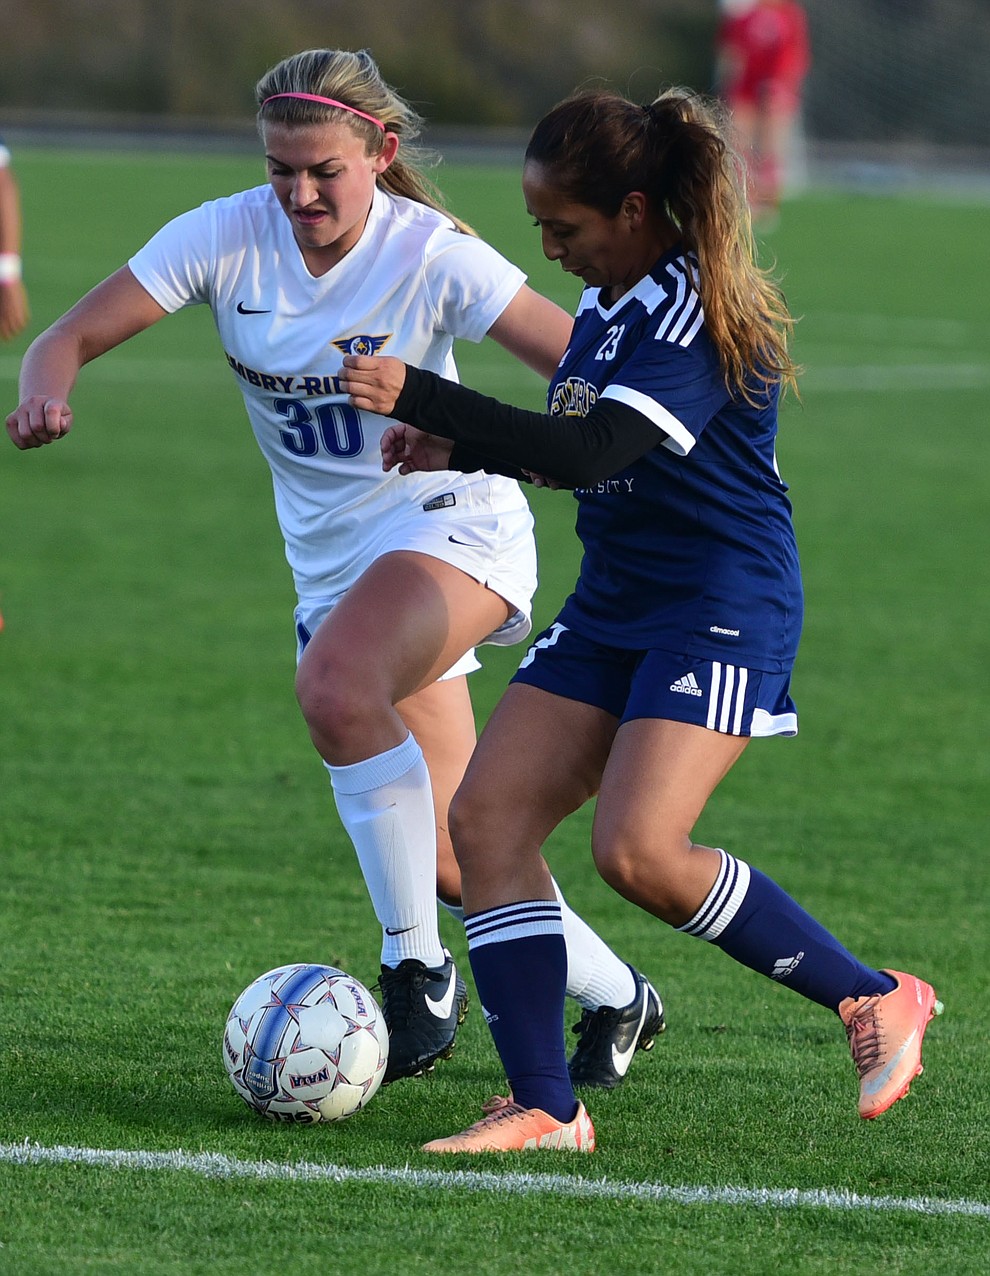 Embry Riddle's Nat Bristol moves the ball into the box as the Lady Eagles take on La Sierra in an afternoon matchup Thursday Nov. 3 in Prescott.